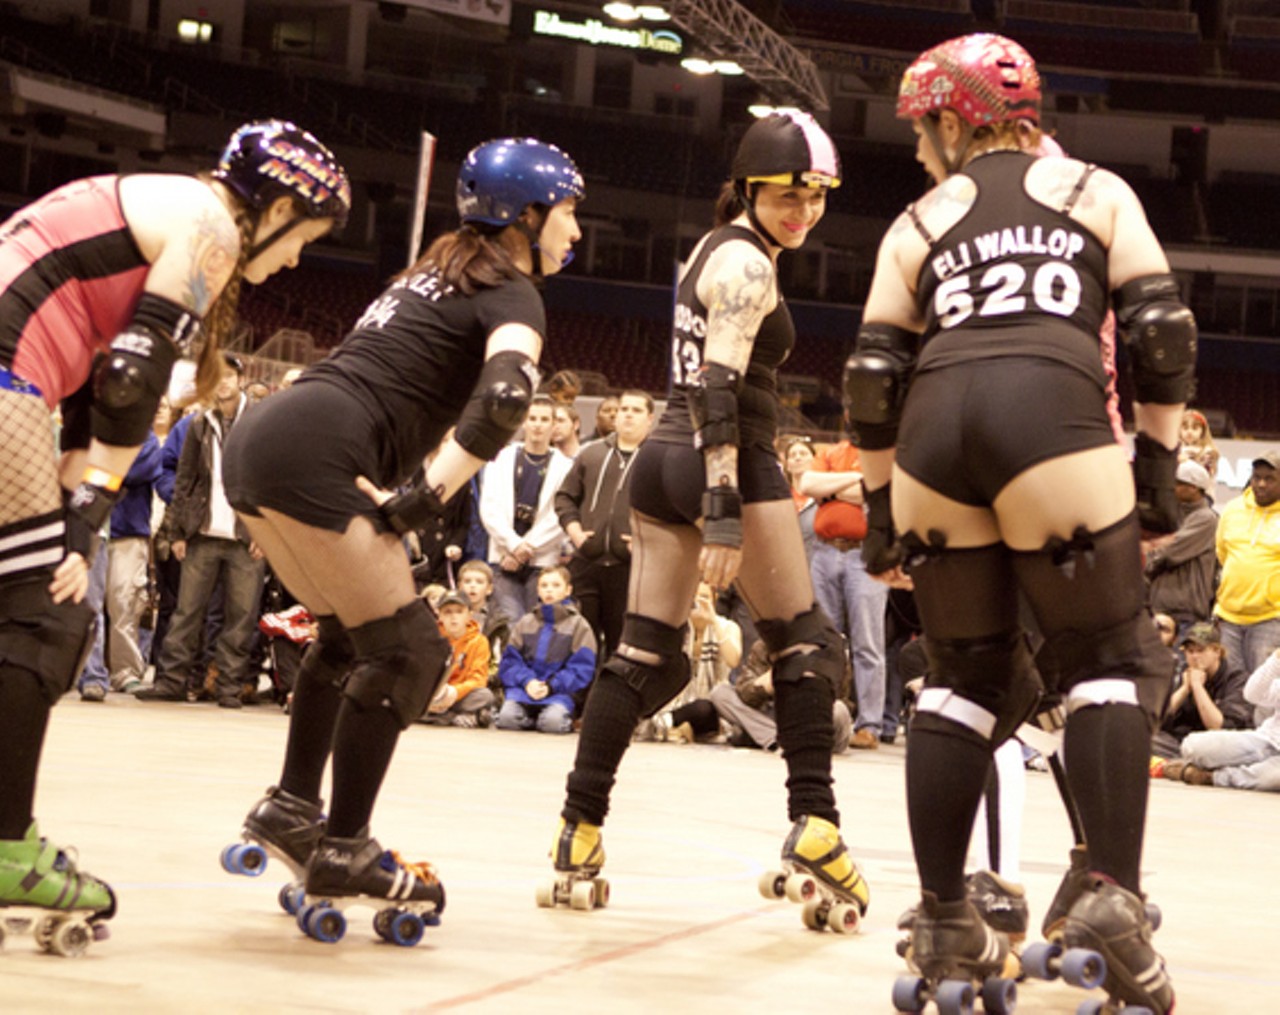 The Arch Rival Roller Girls at the St. Louis Auto Show